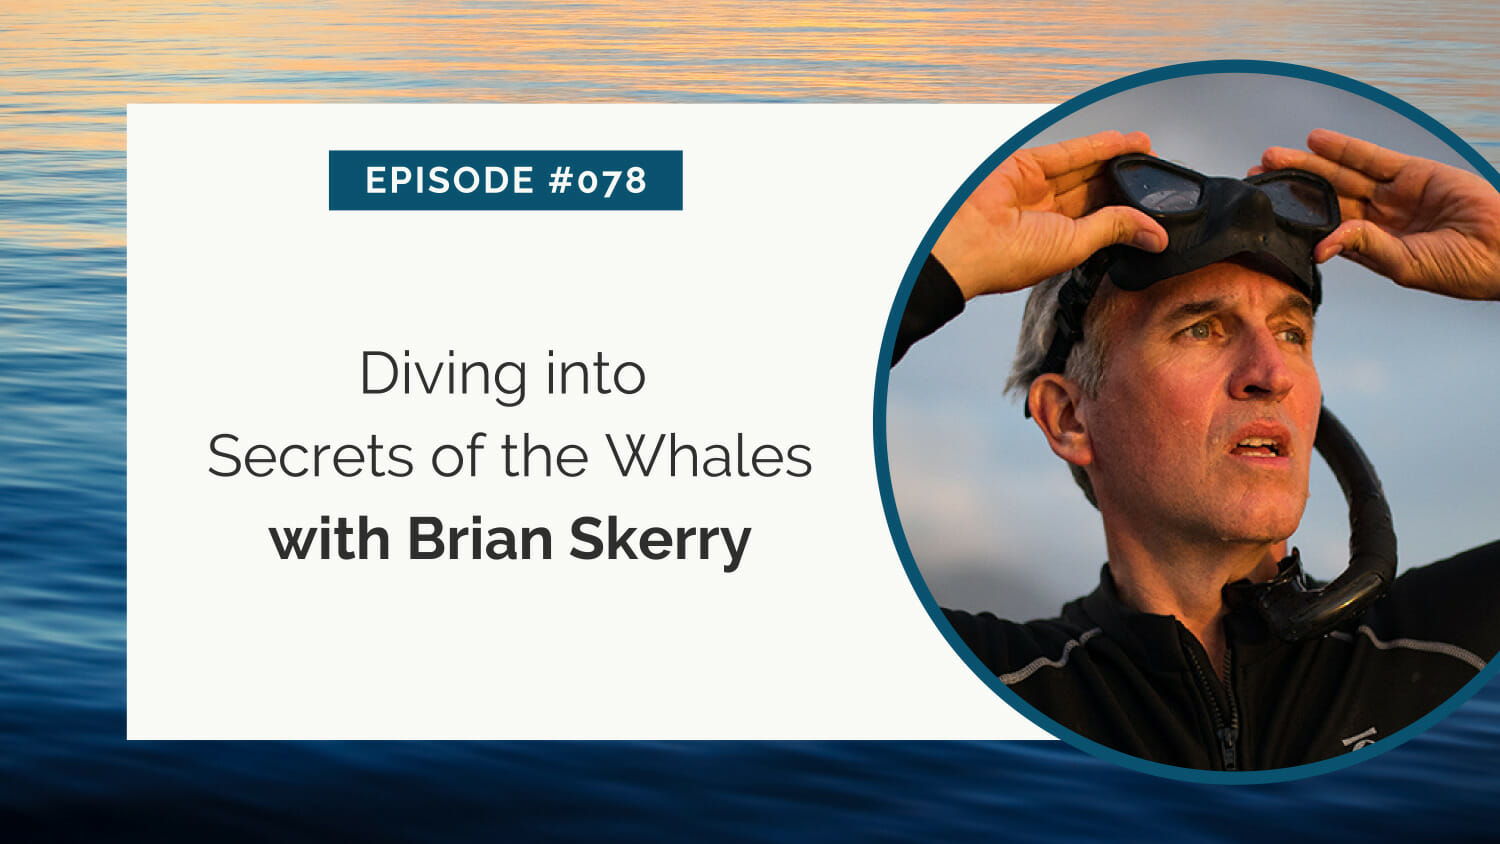 Man with binoculars featured in "episode #078 - diving into secrets of the whales with brian skerry.